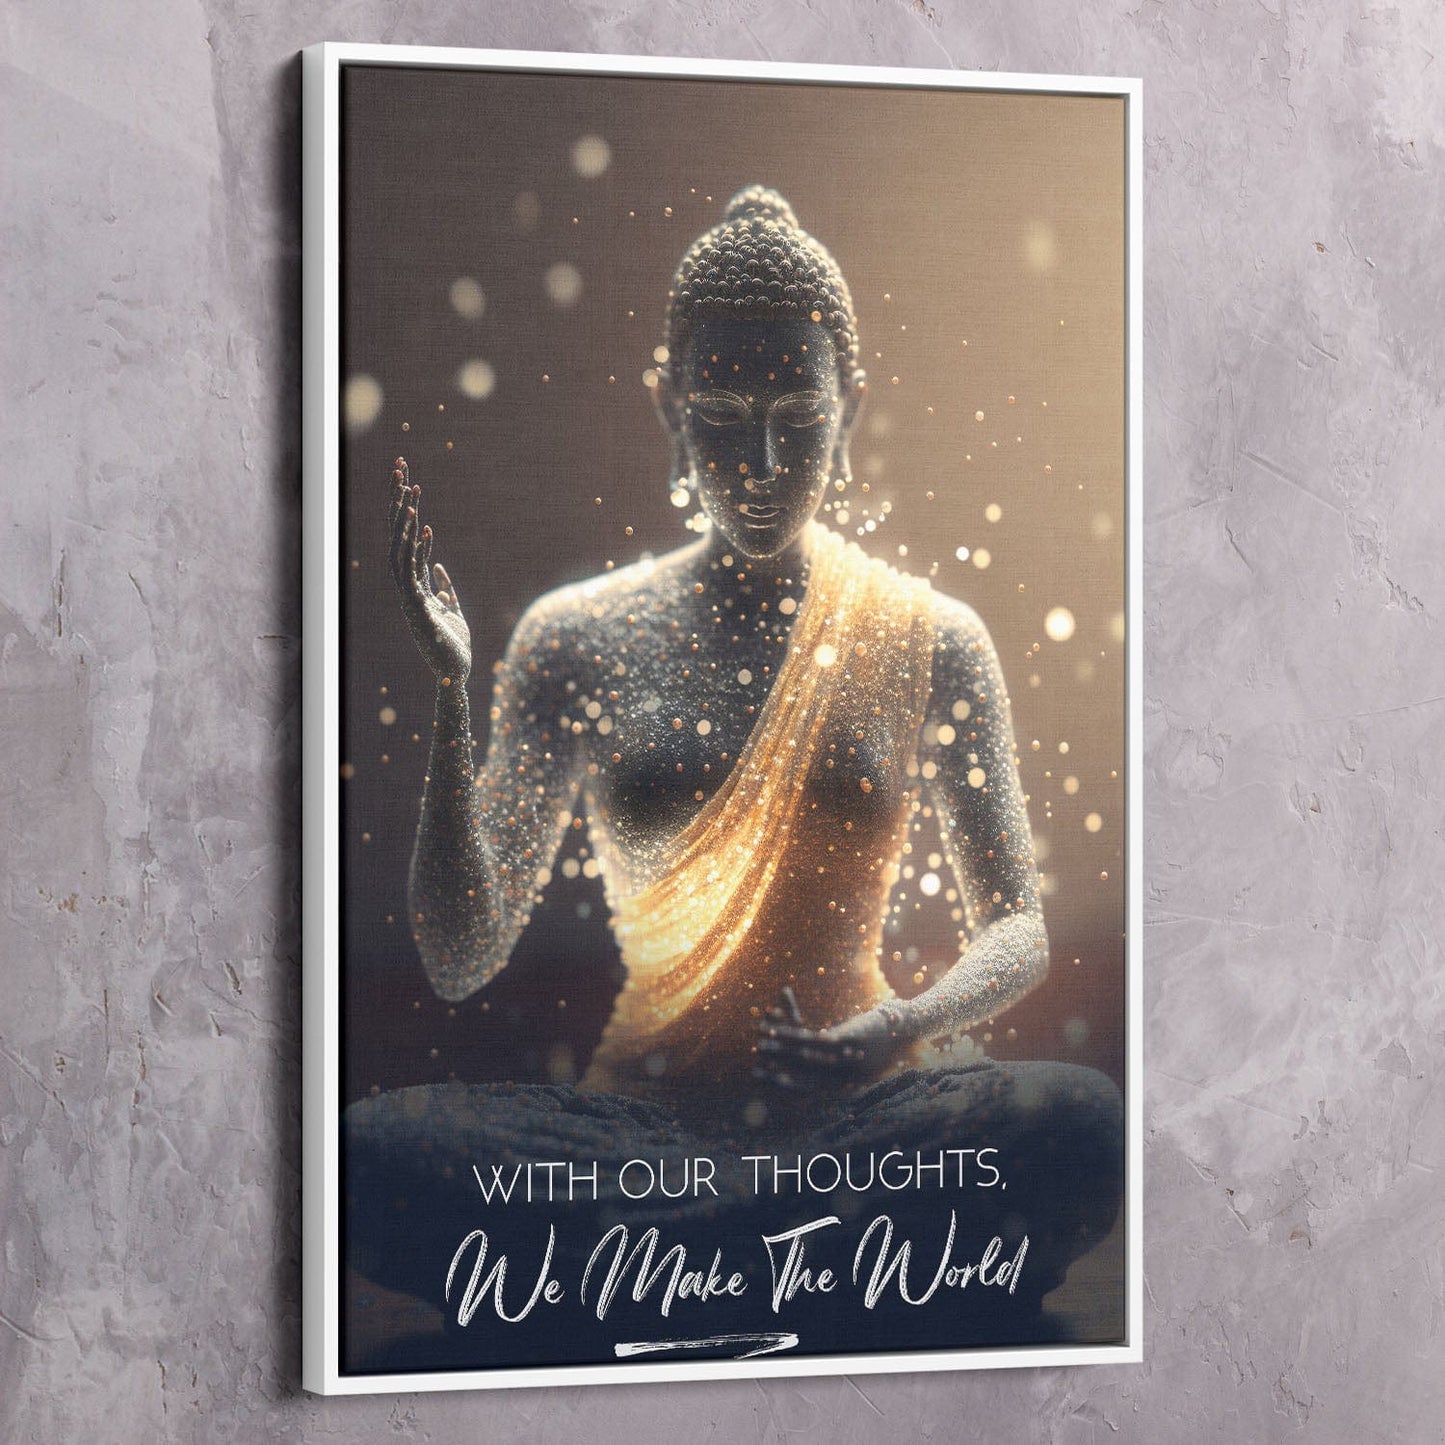 Buddha - With Our Thoughts Quote Wall Art | Inspirational Wall Art Motivational Wall Art Quotes Office Art | ImpaktMaker Exclusive Canvas Art Portrait